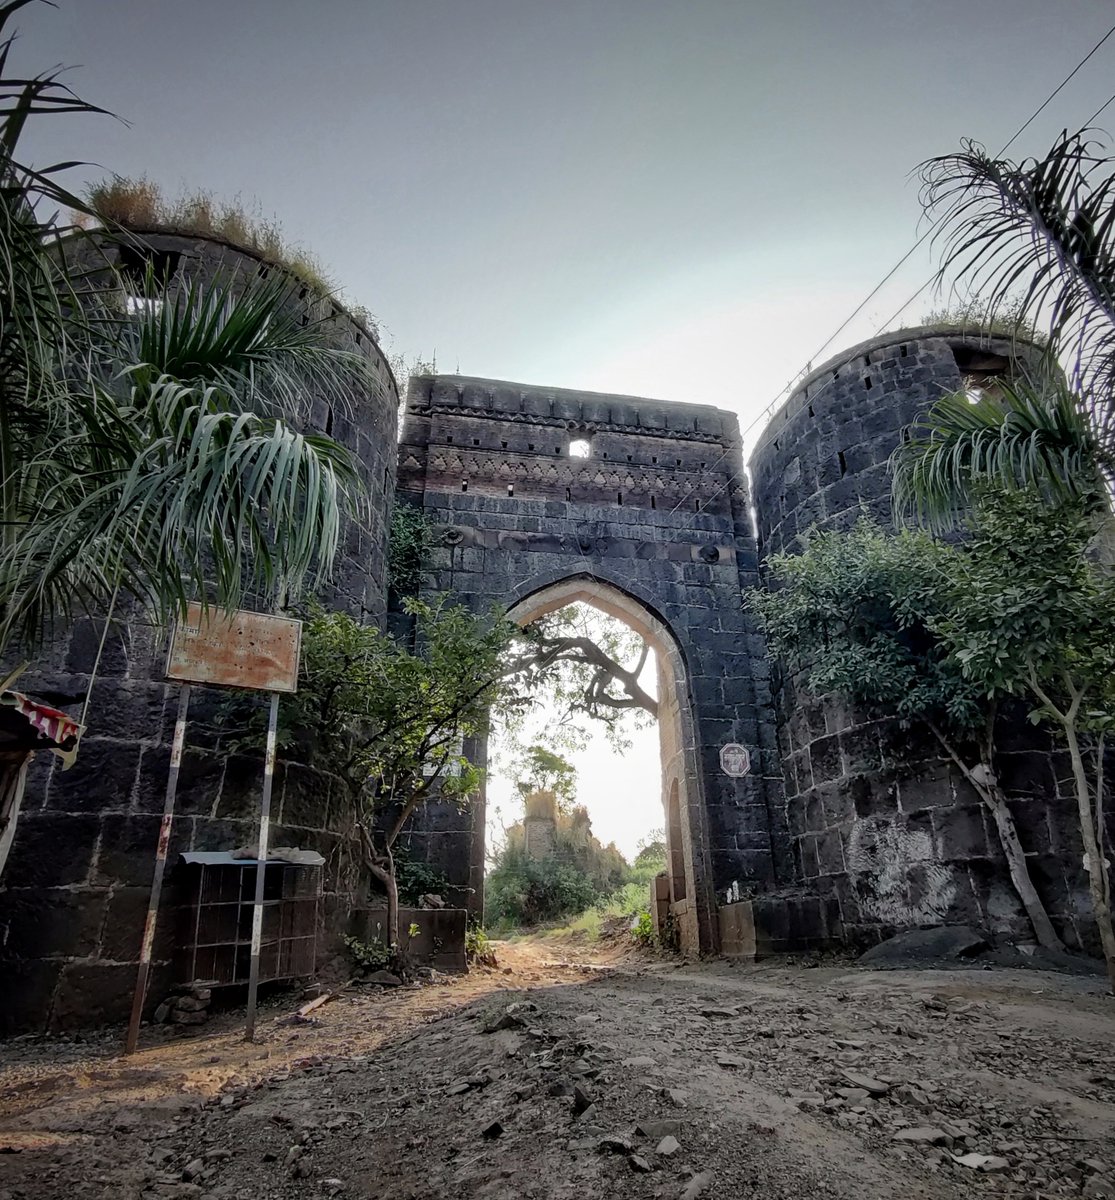 A humungous entrance gate leaves you fascinated! The surroundings are not that clean, but you can imagine the grandness of this place during its prime time. (10/17)